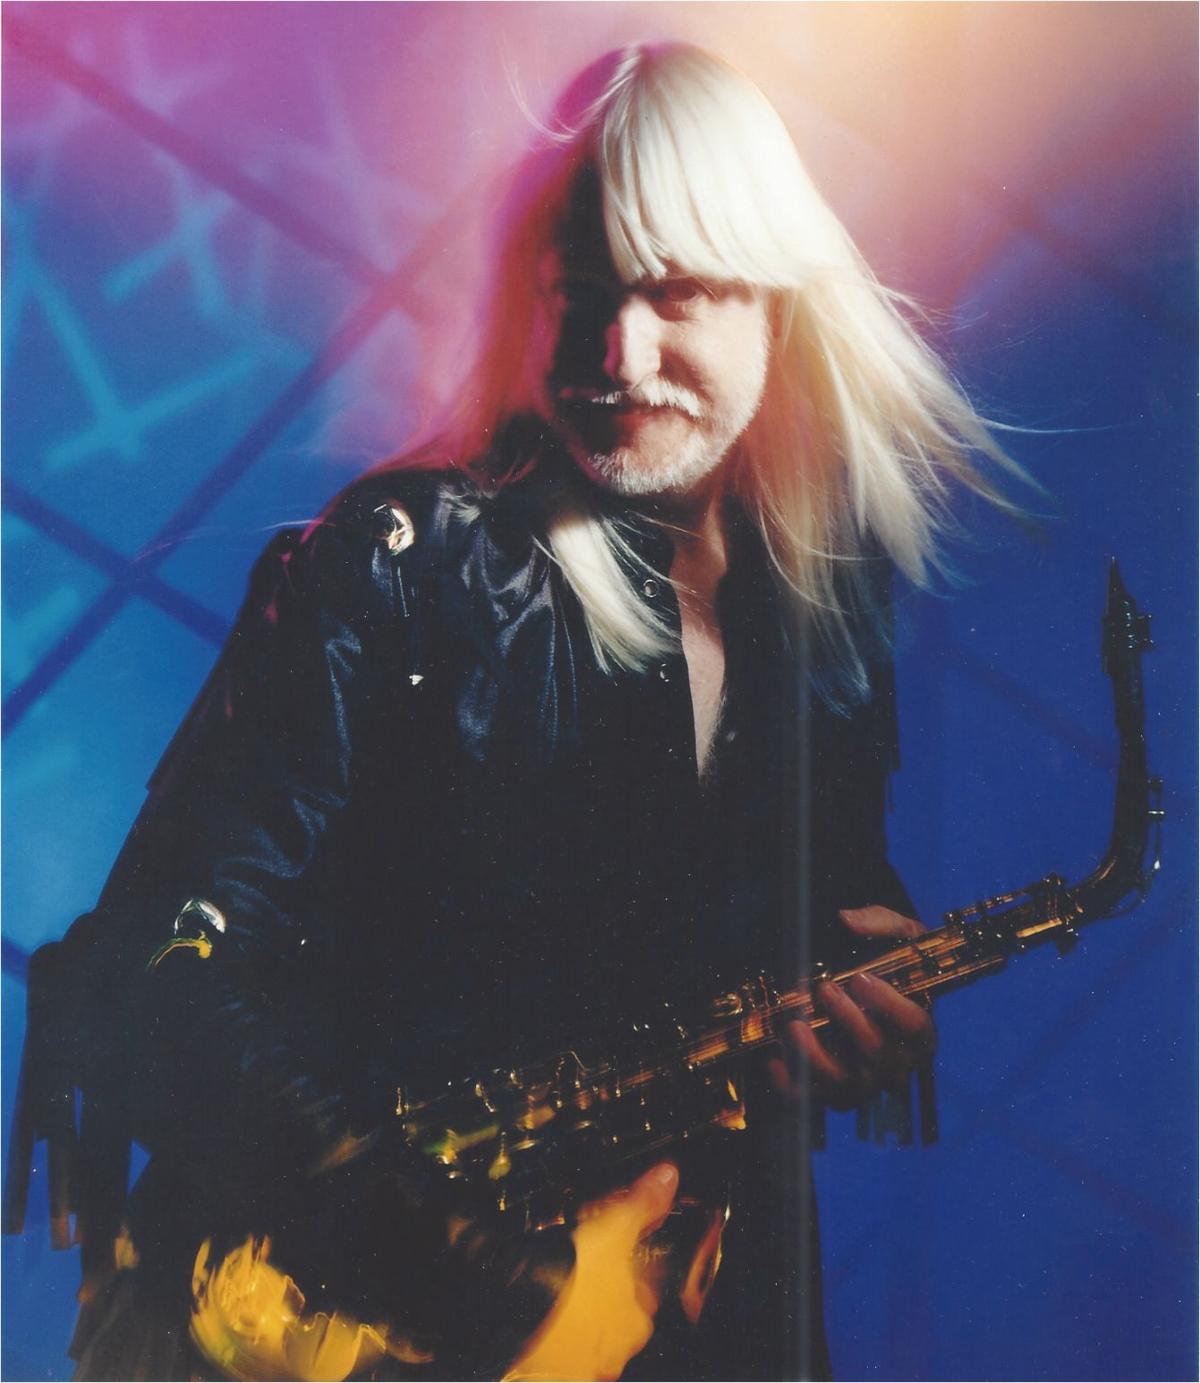 Edgar Winter's life has been led by music and that's never going to